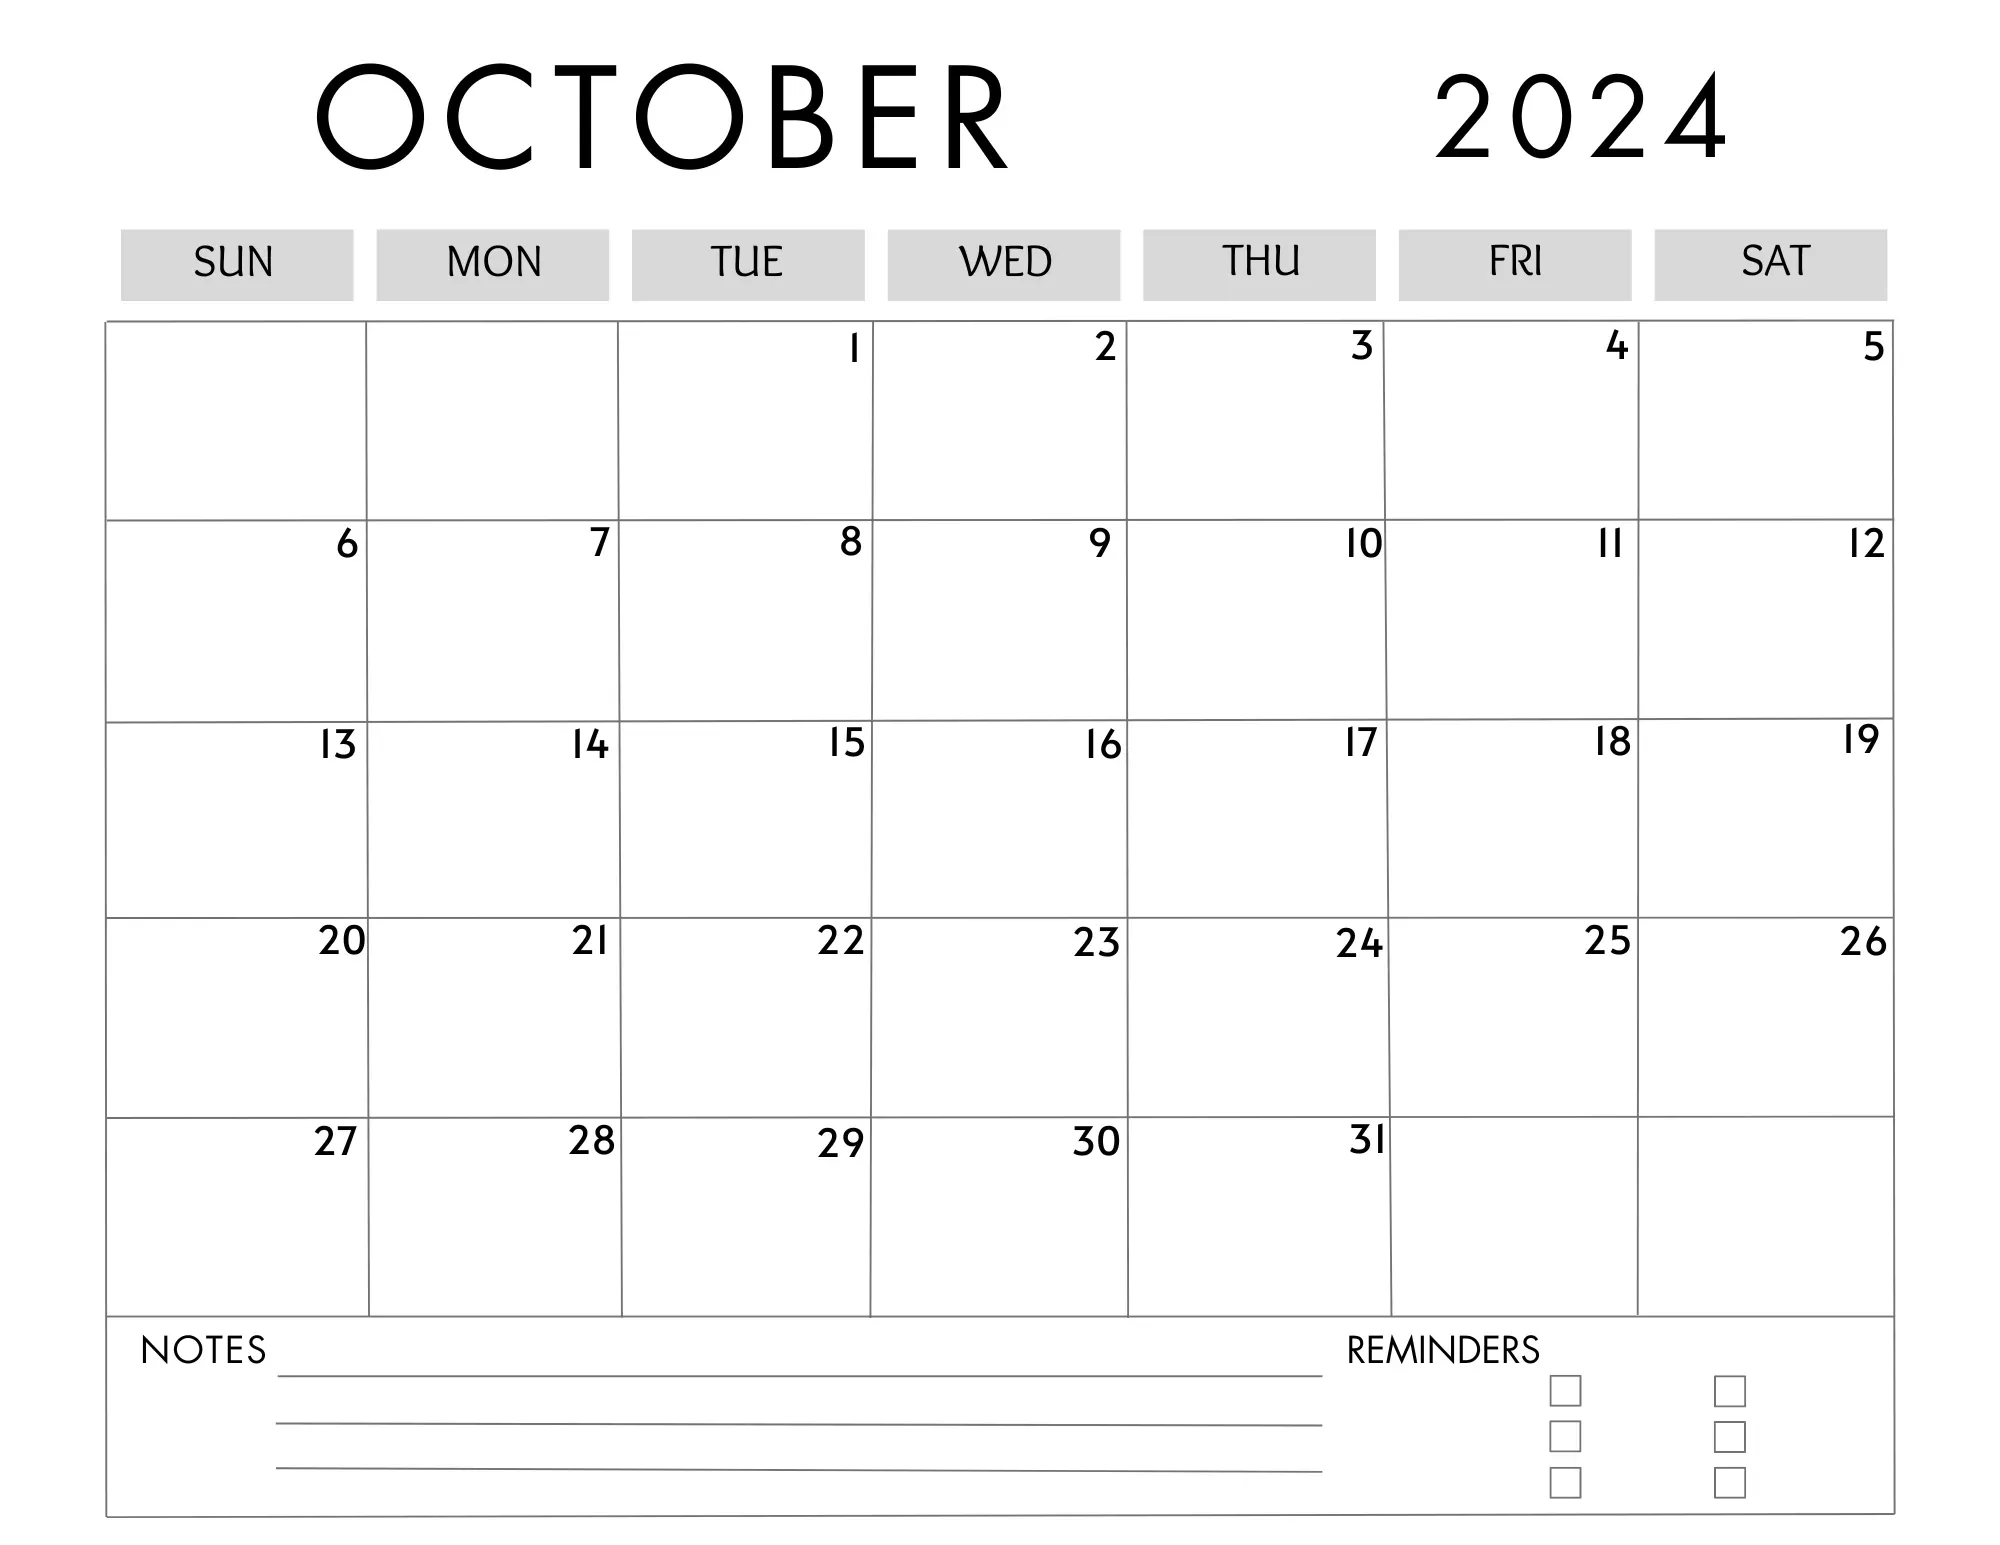 October 2024 Calendar with Notes